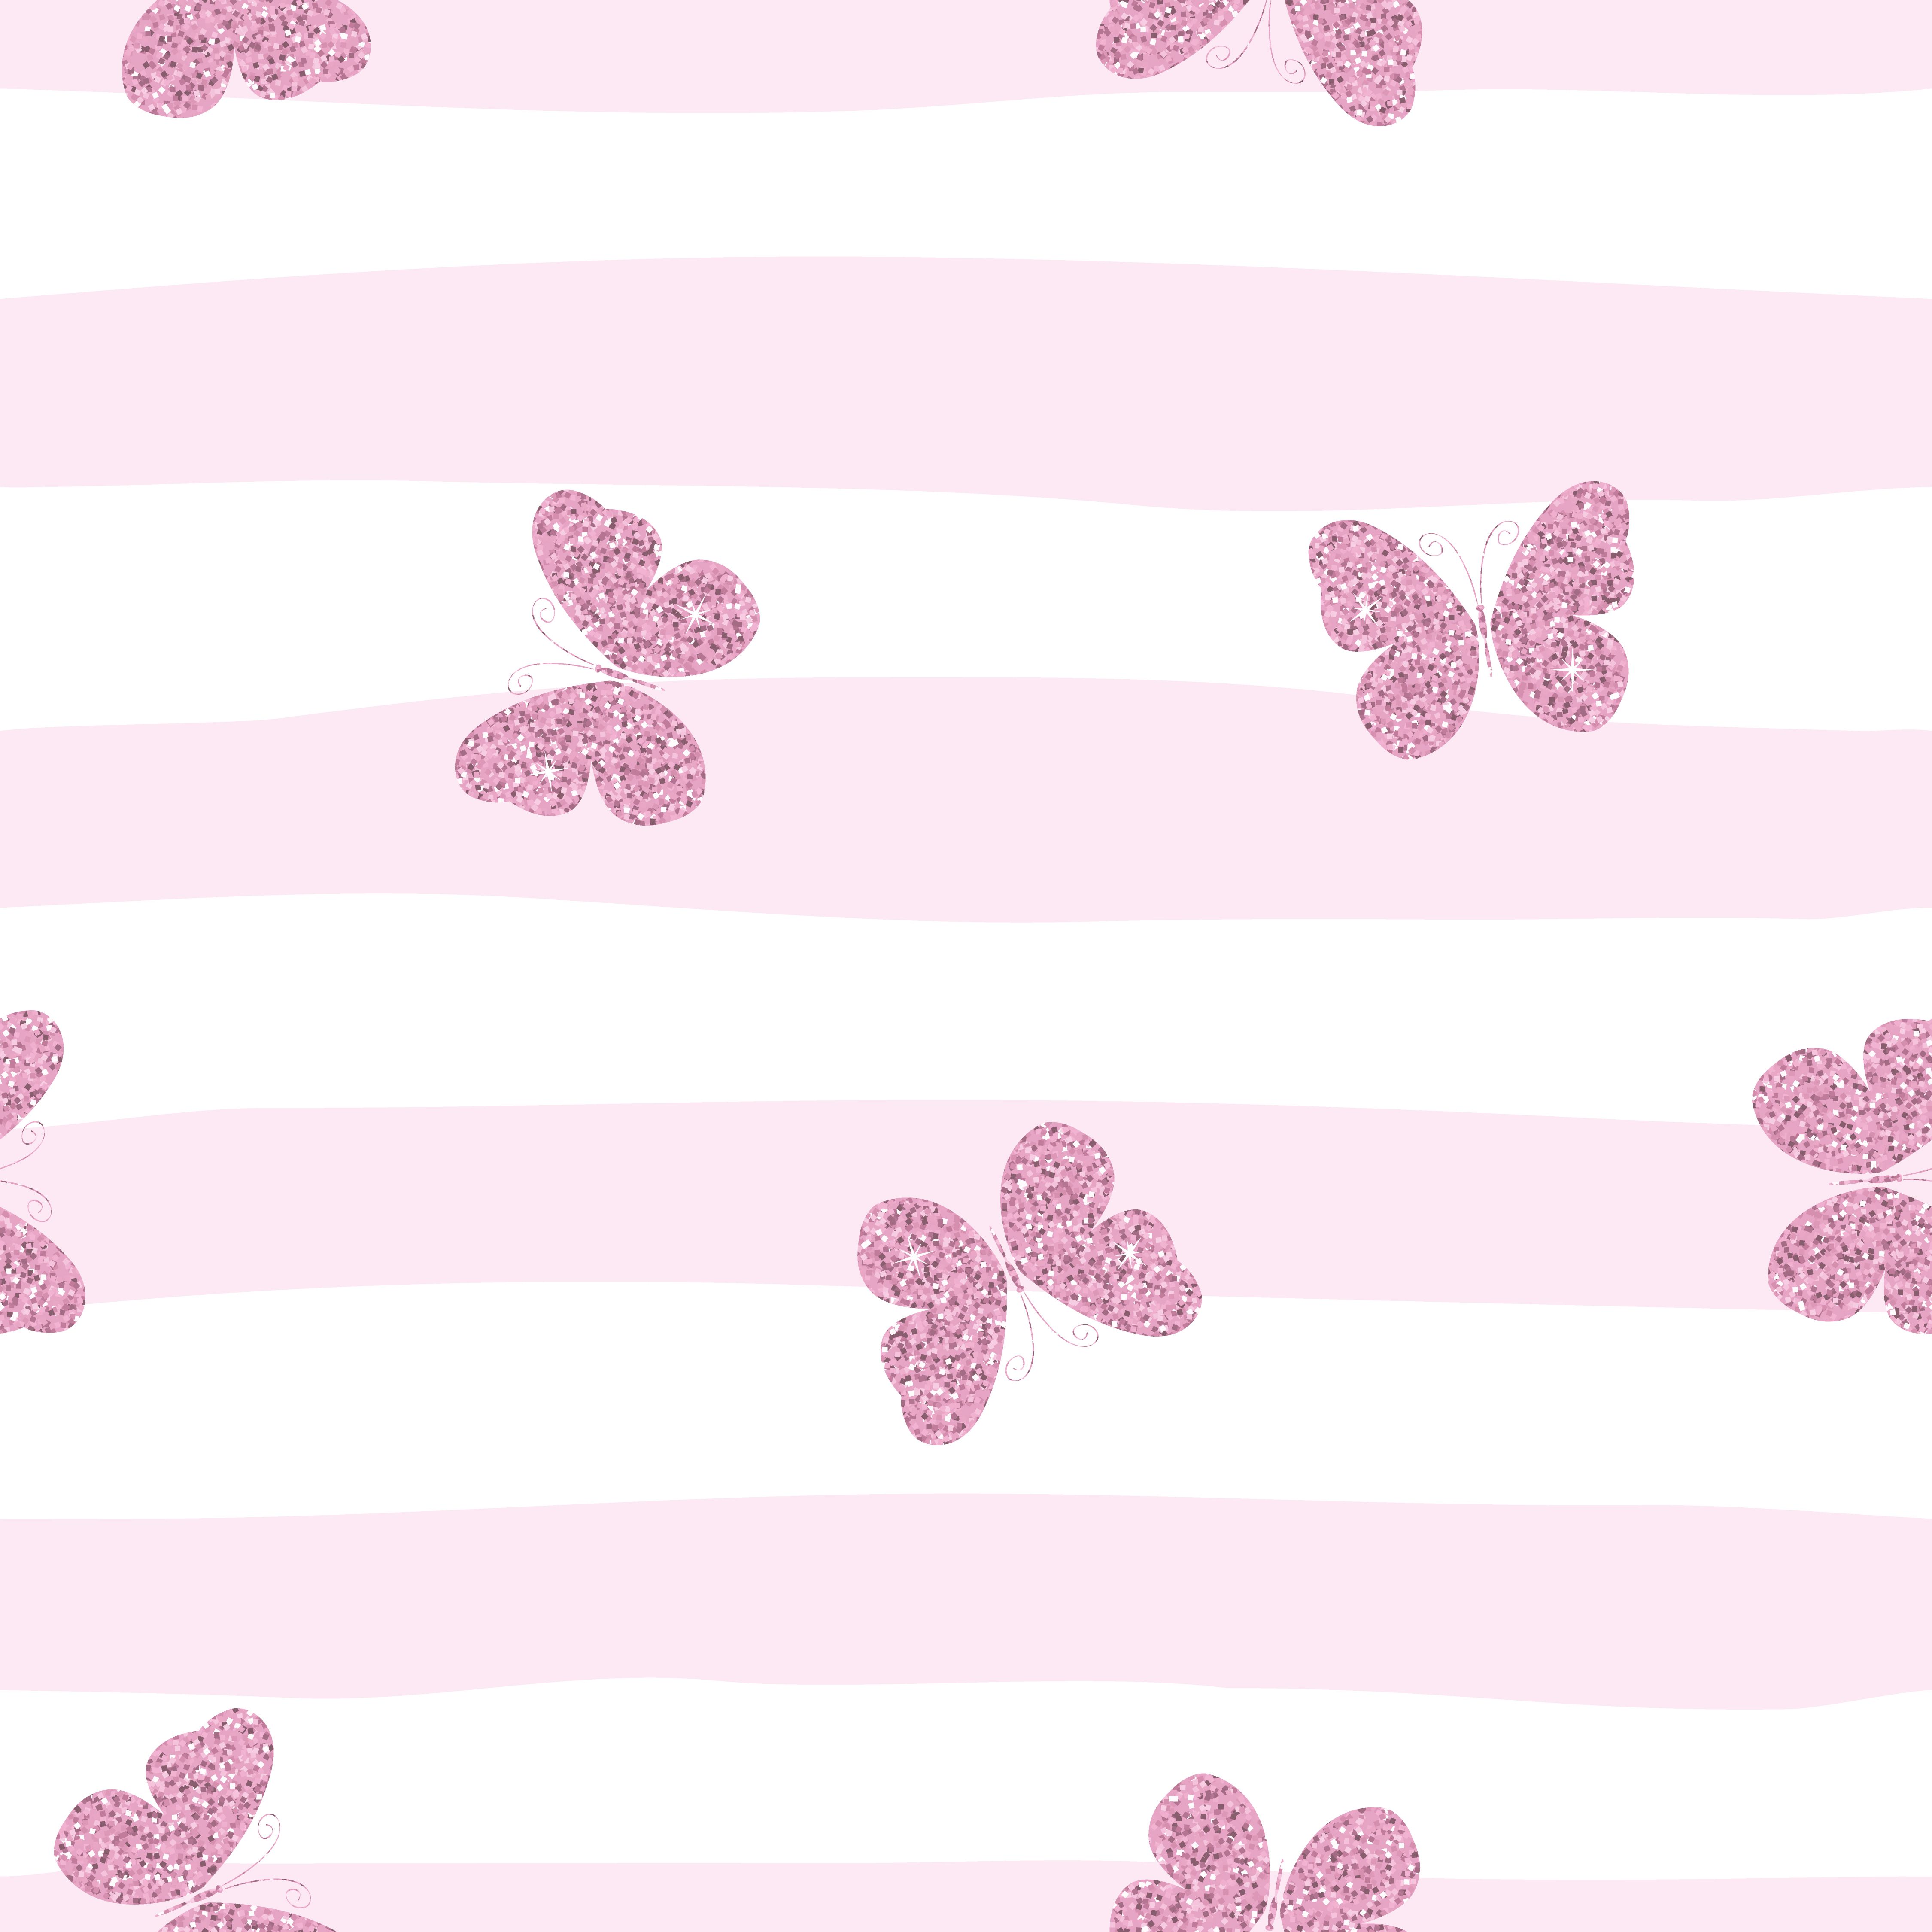 Purple pink glittering butterflies on striped background. Cute seamless pattern for girls. Free Vectors, Clipart Graphics & Vector Art